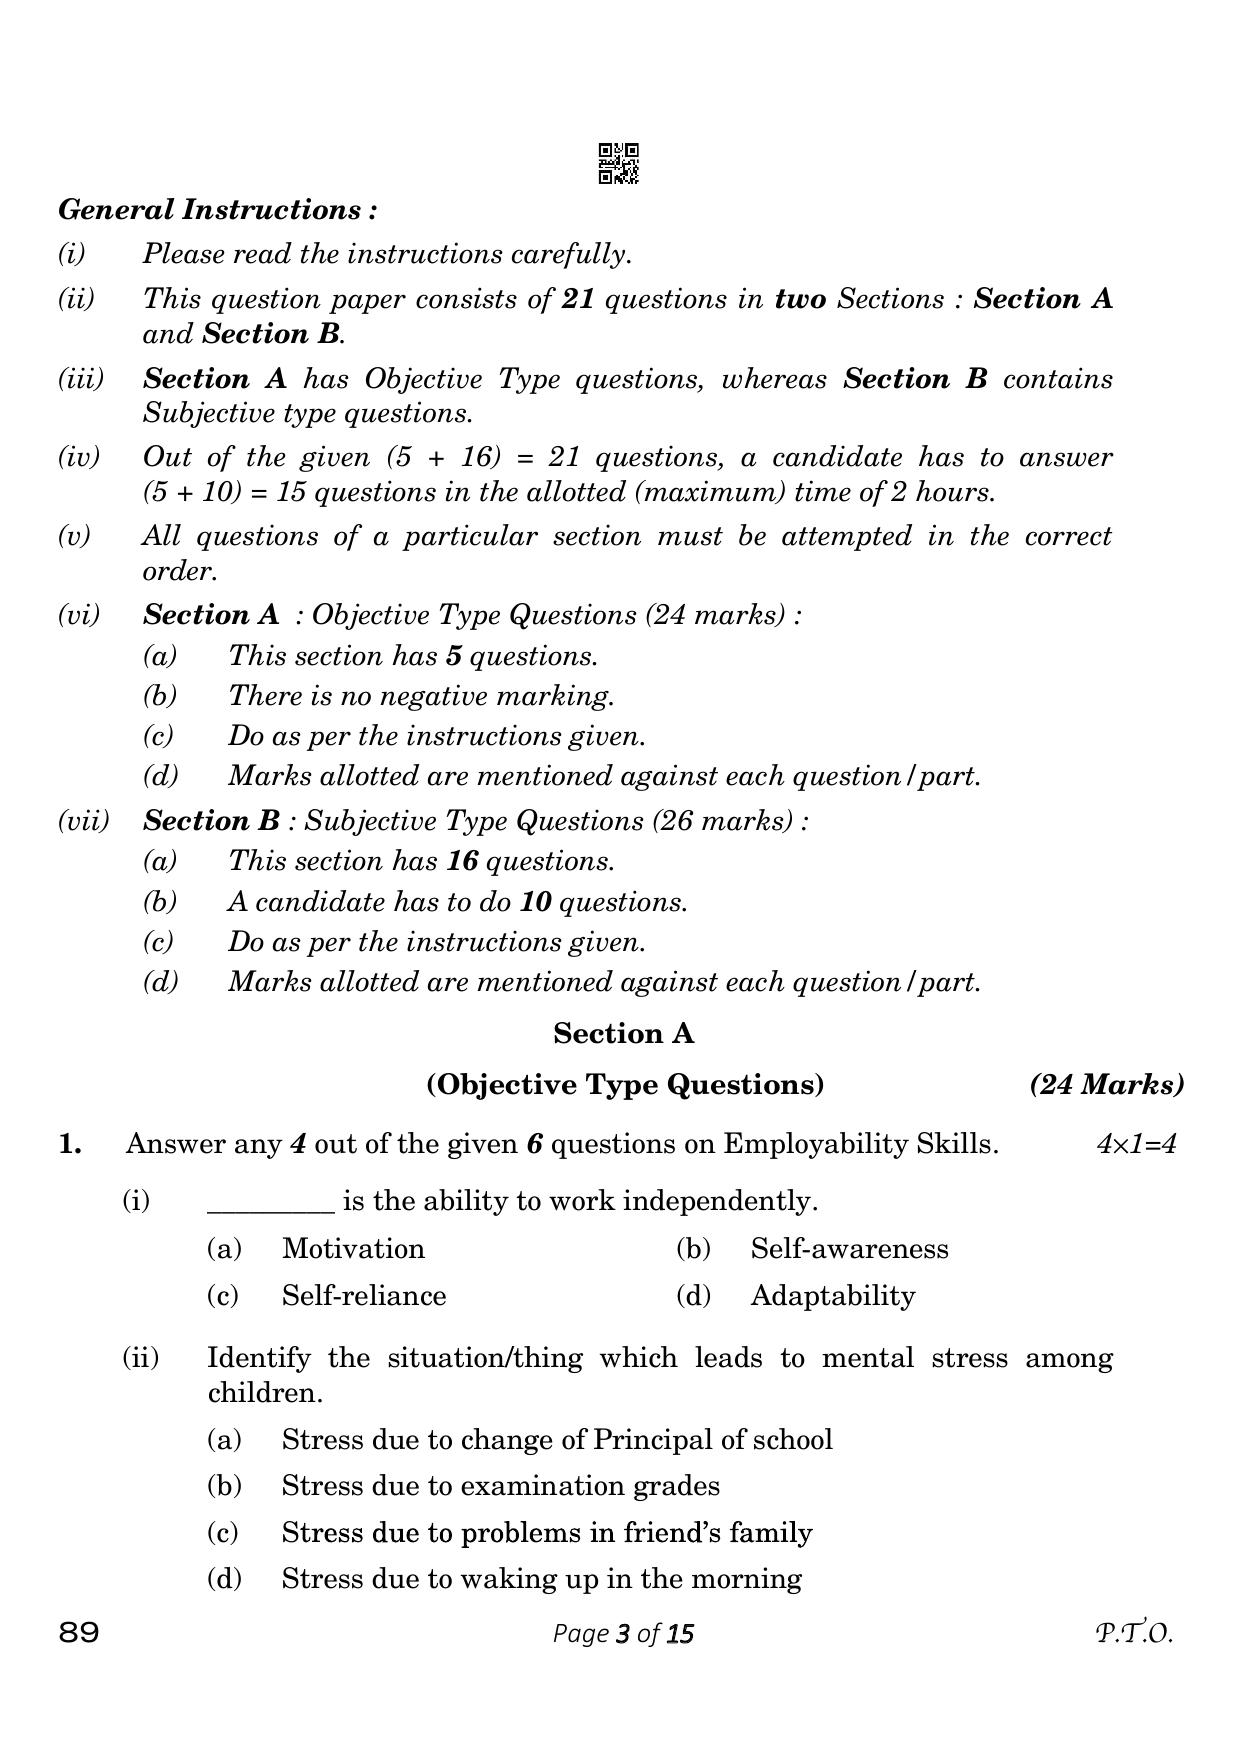 CBSE Class 10 Information Technology (Compartment) 2023 Question Paper - Page 3